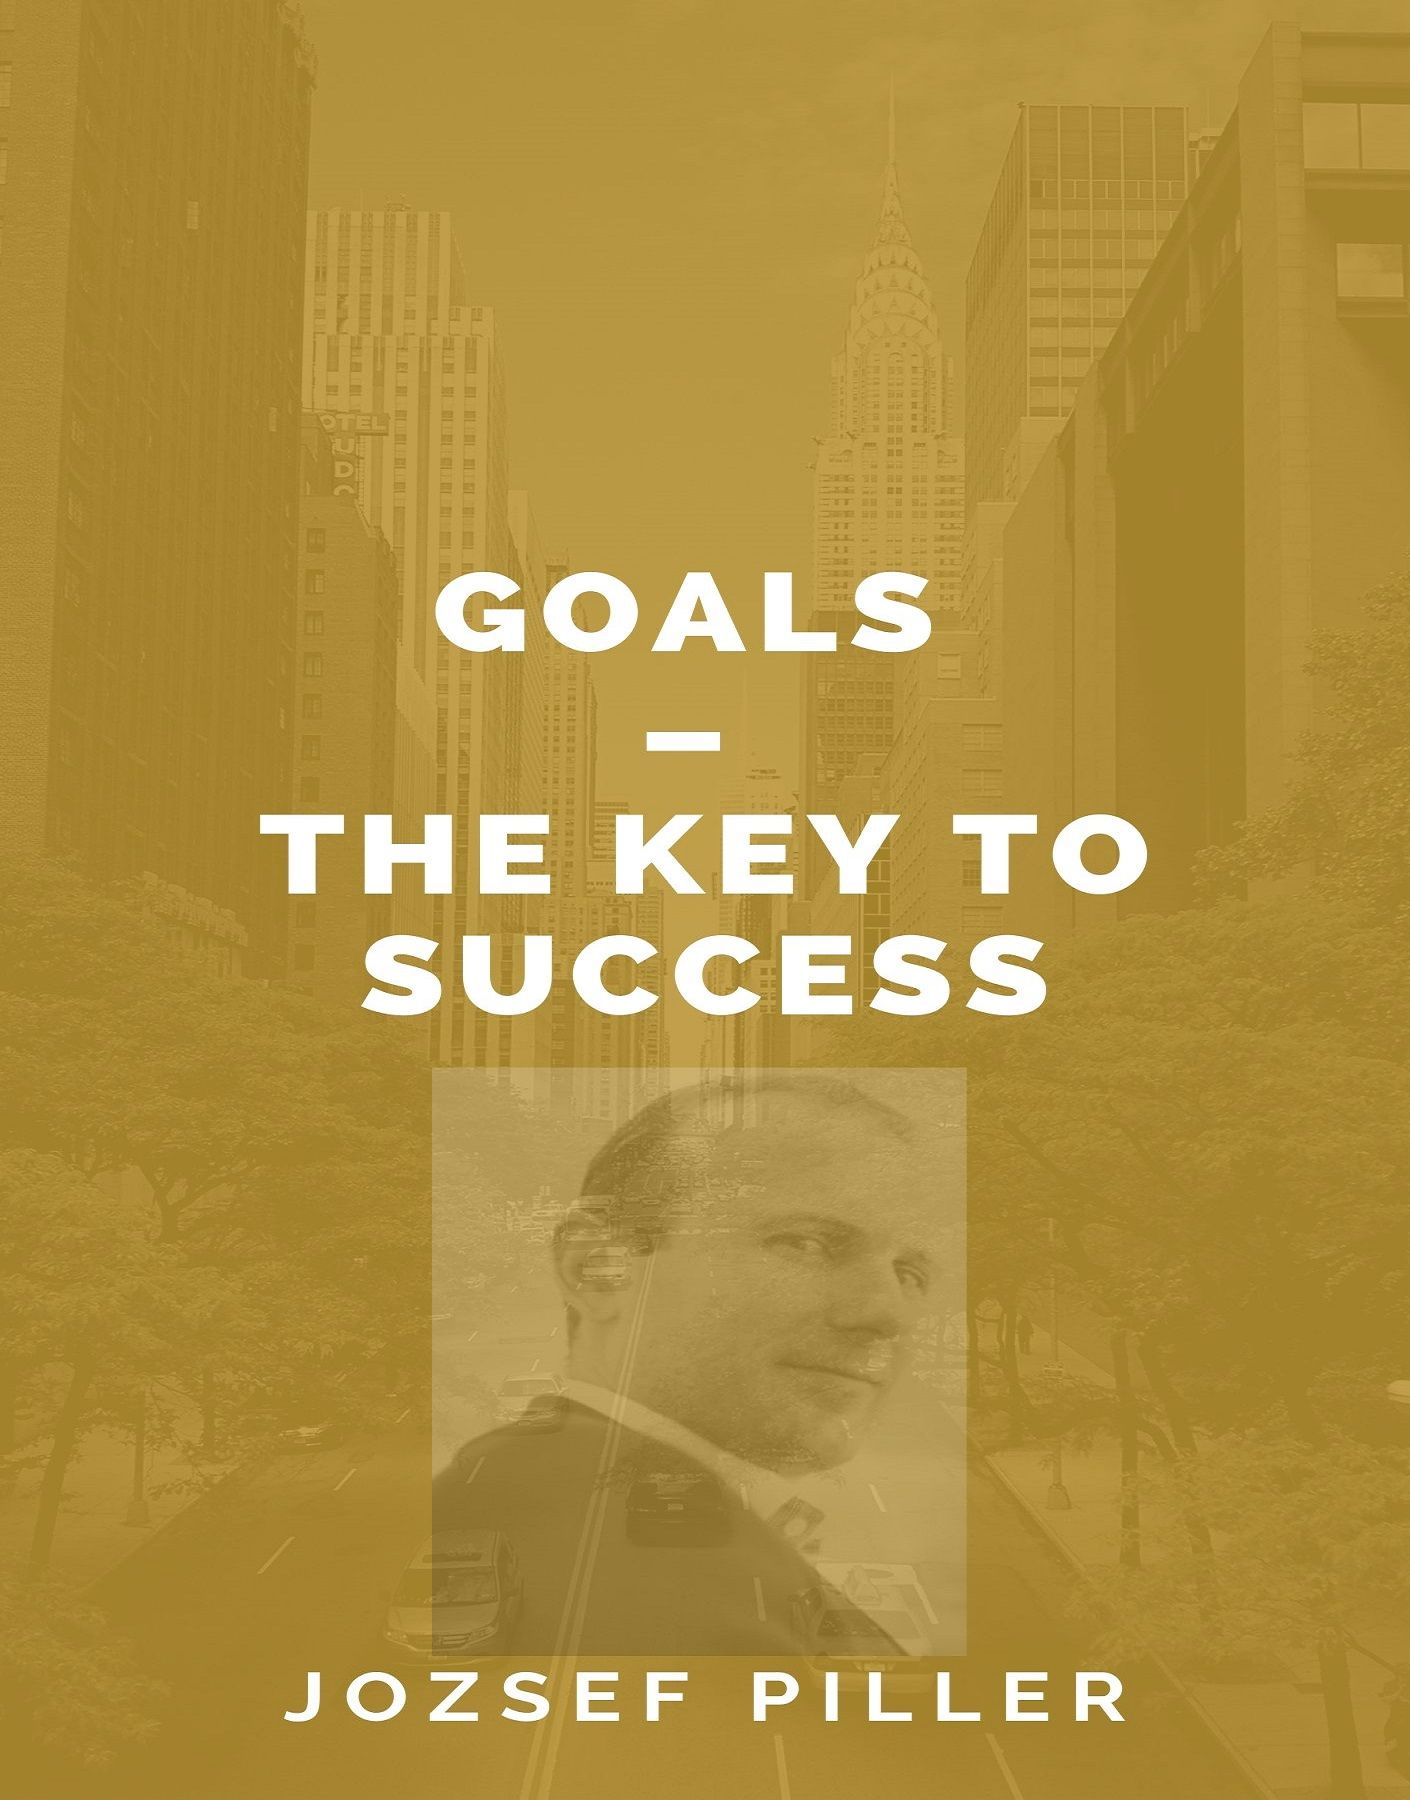 Goals – The Key to Success, audiobook by Jozsef Piller